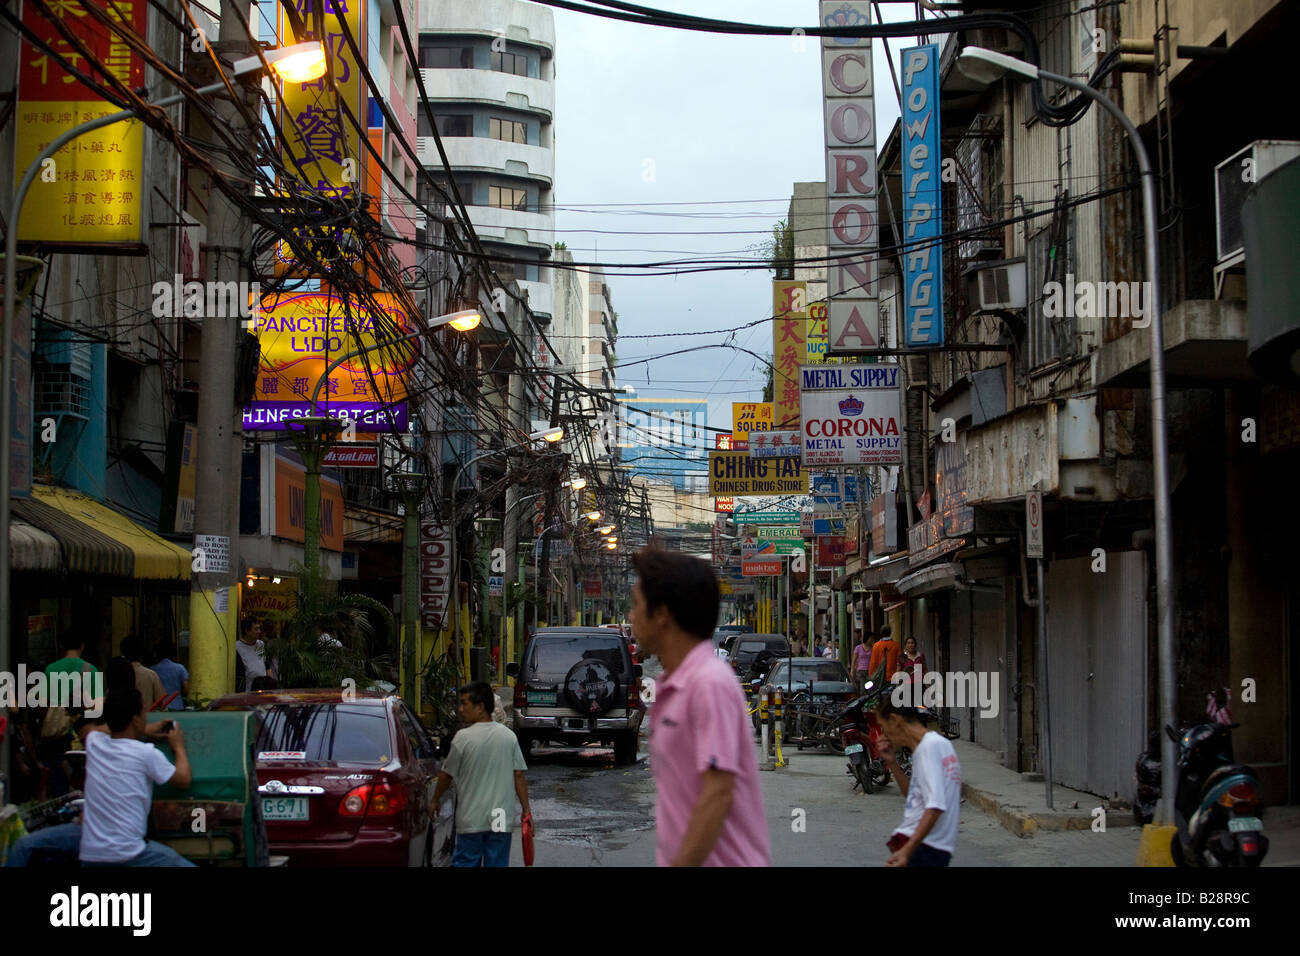 A street scene in the China Town district of Manila, Philippines. Stock Photo